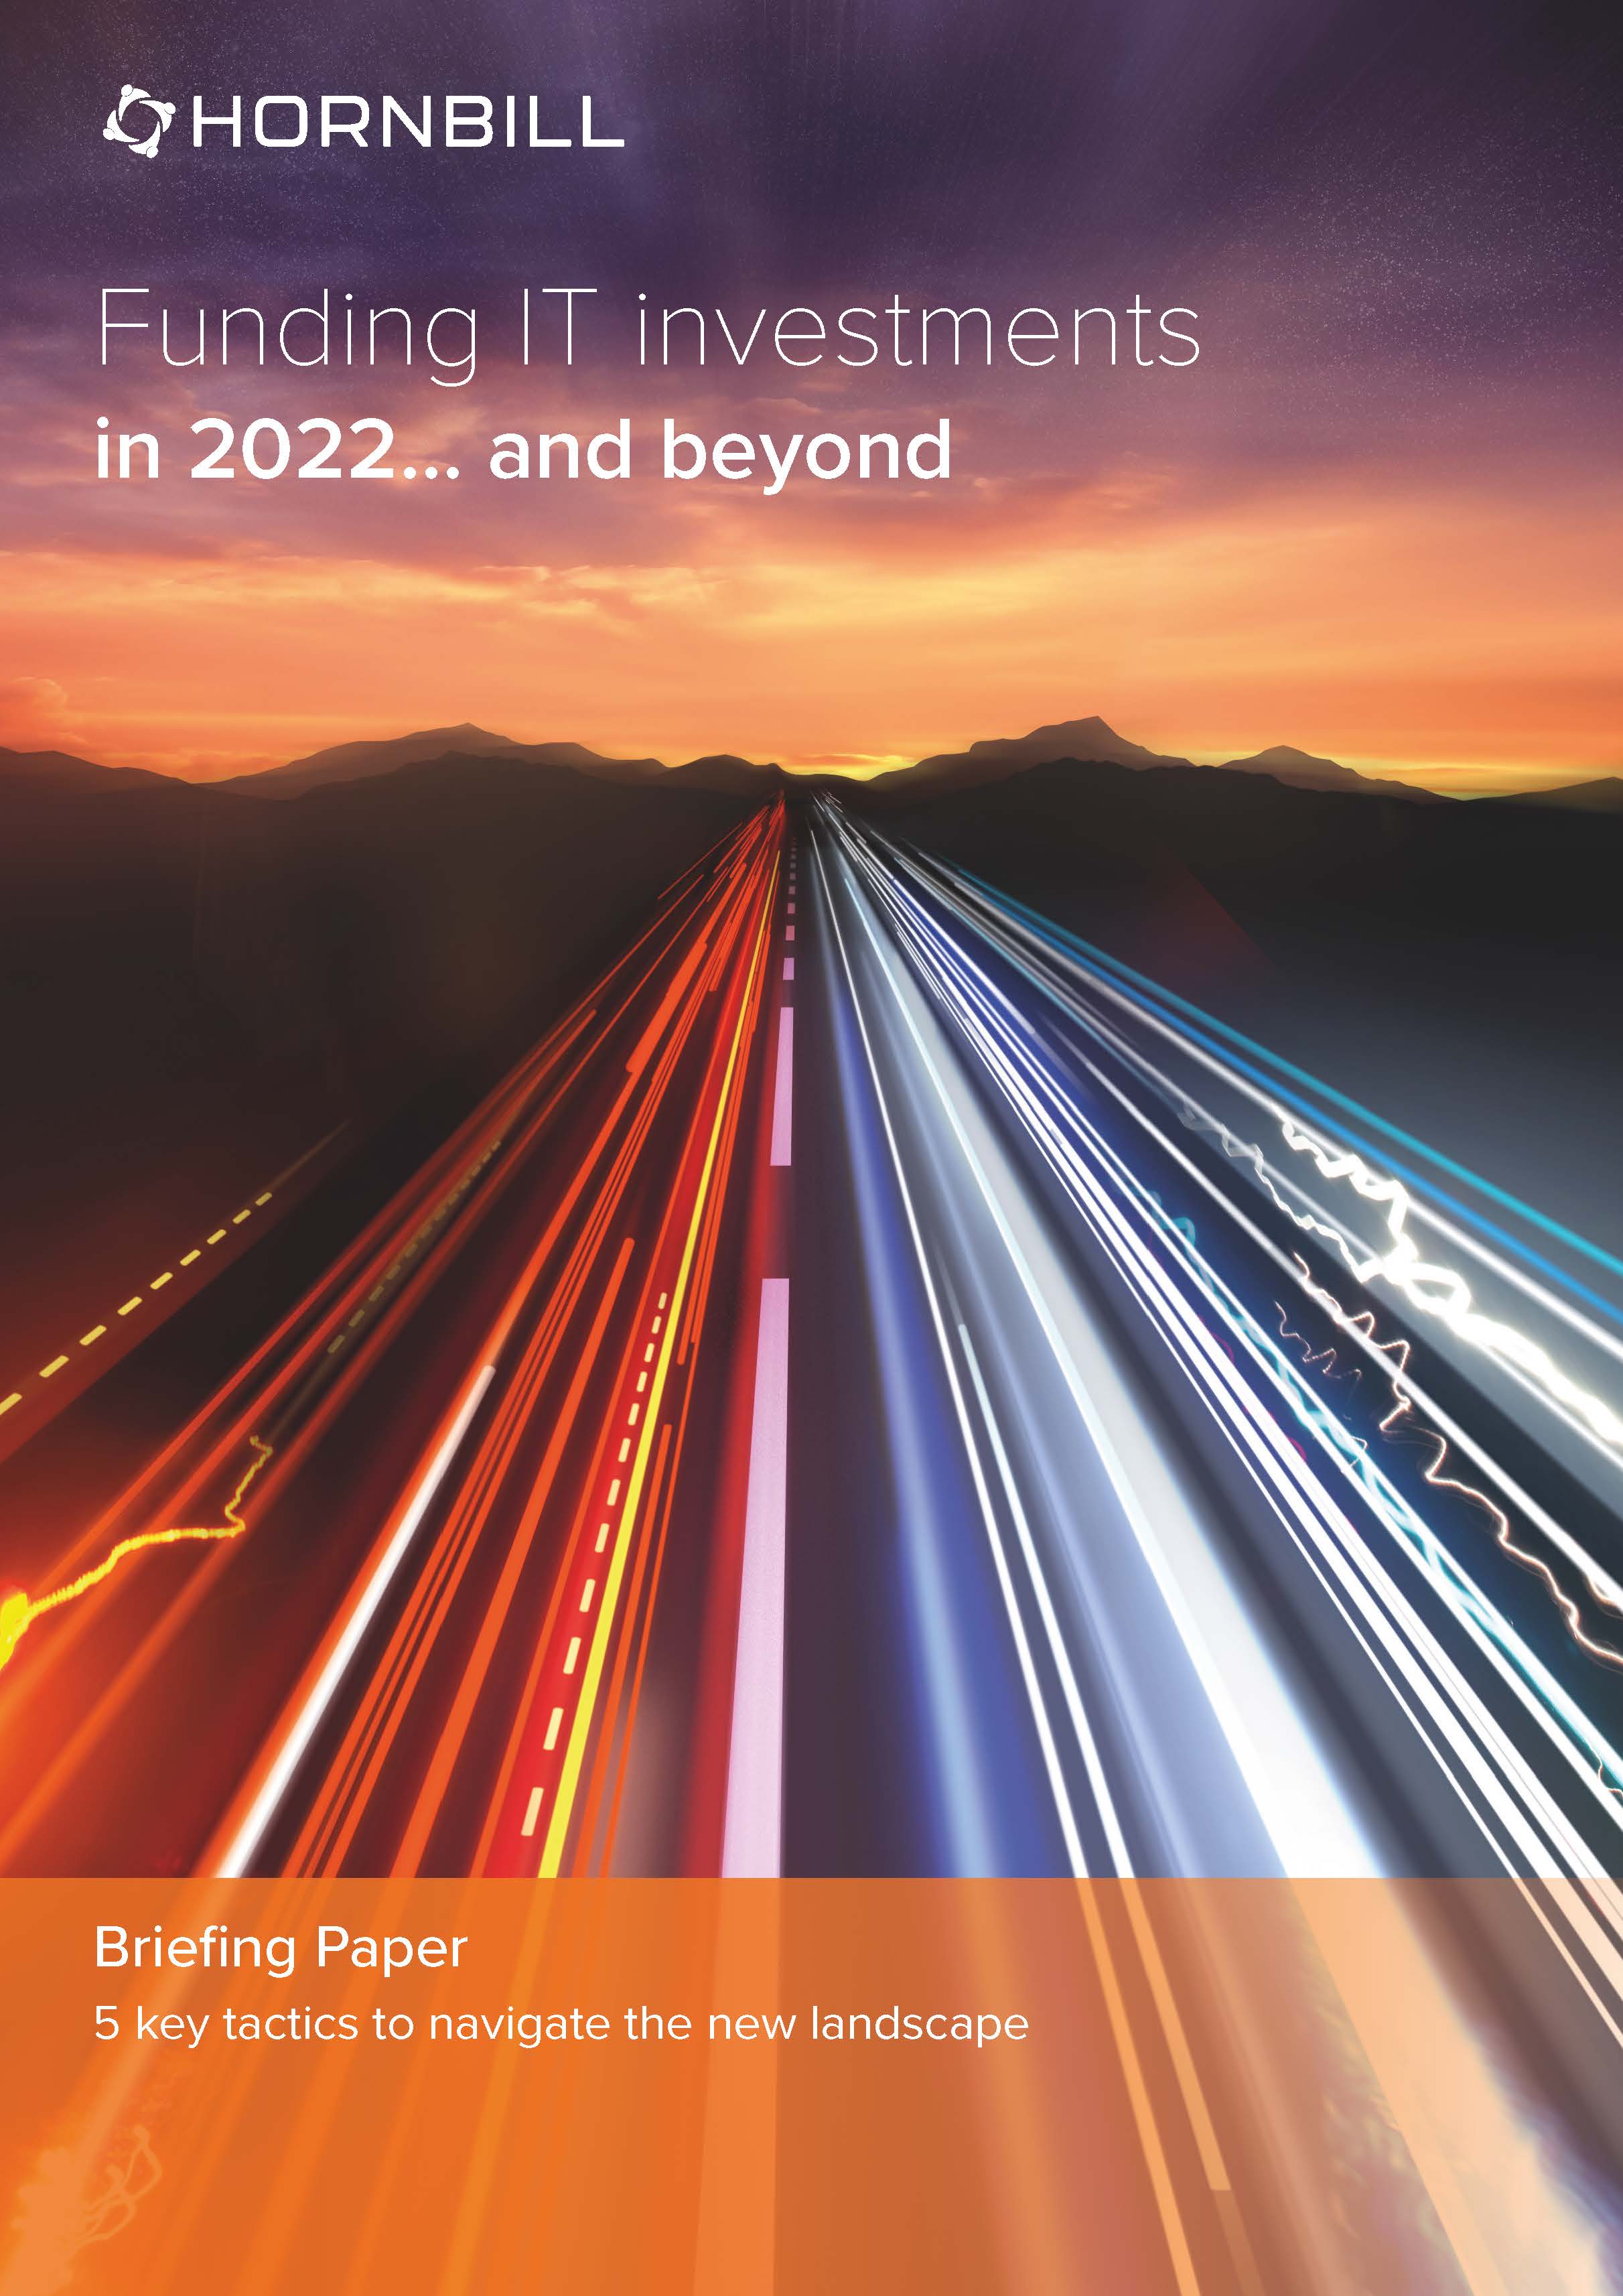 Funding IT investments in 2022 and beyond